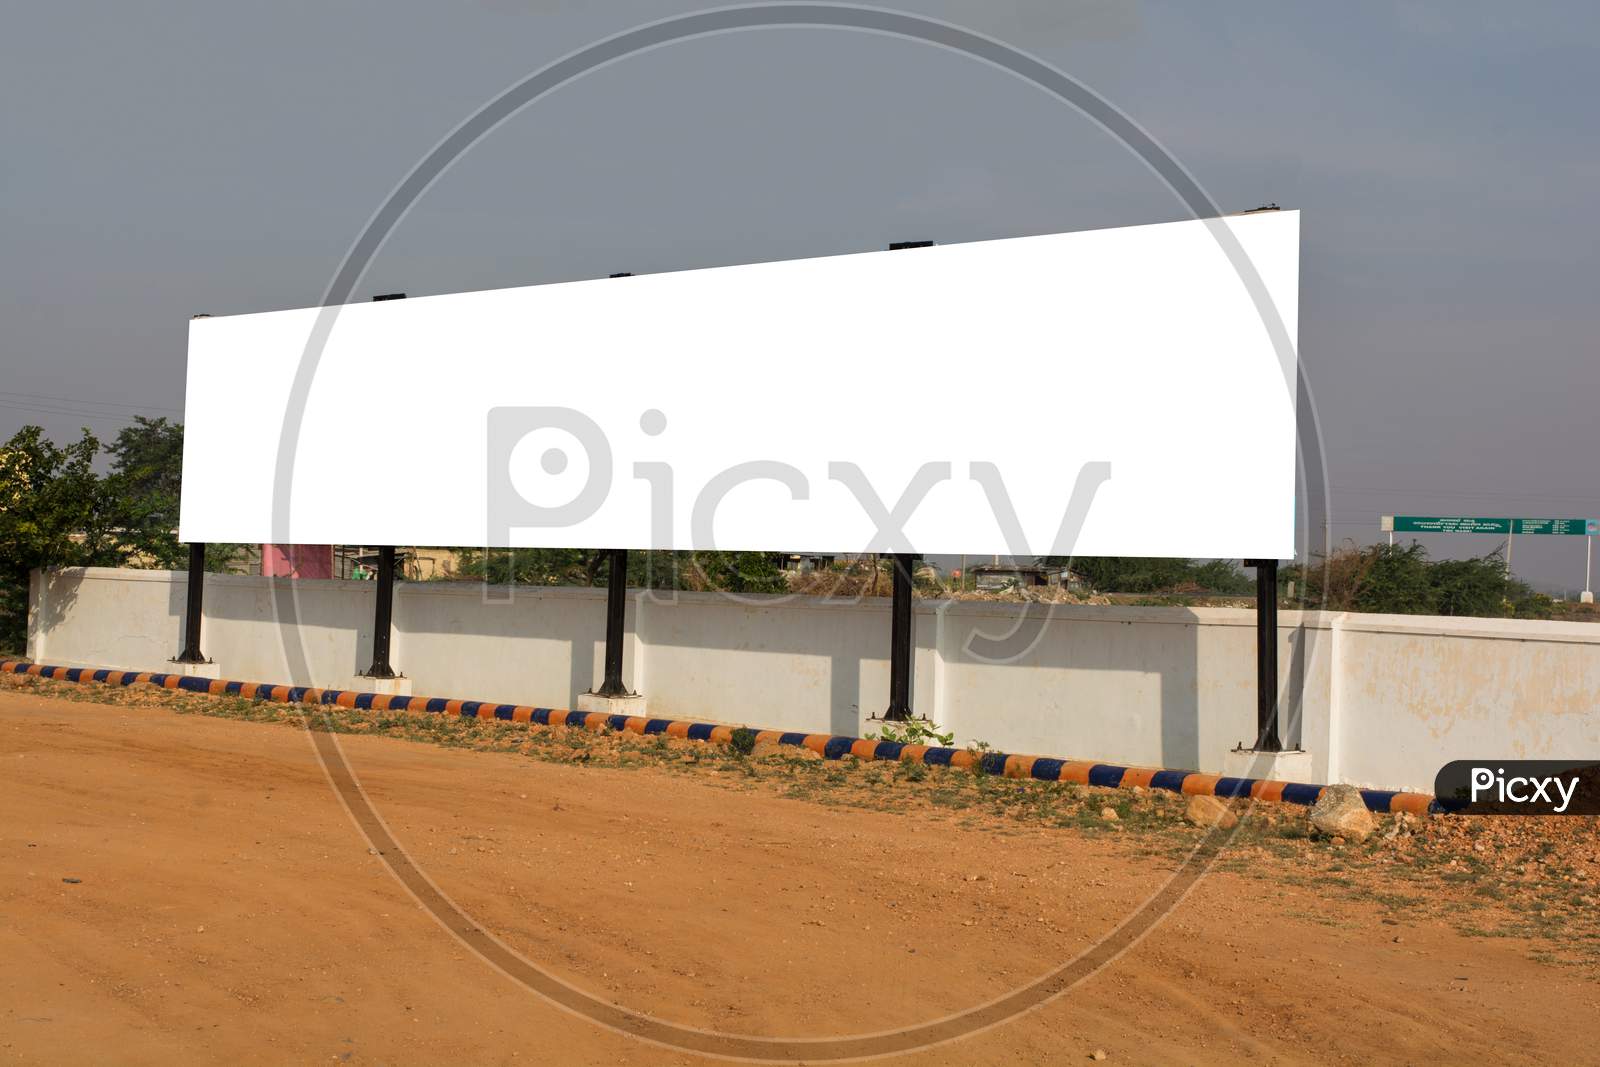 Big Blank Billboard With White Background Space For Advertisement In Urban India.